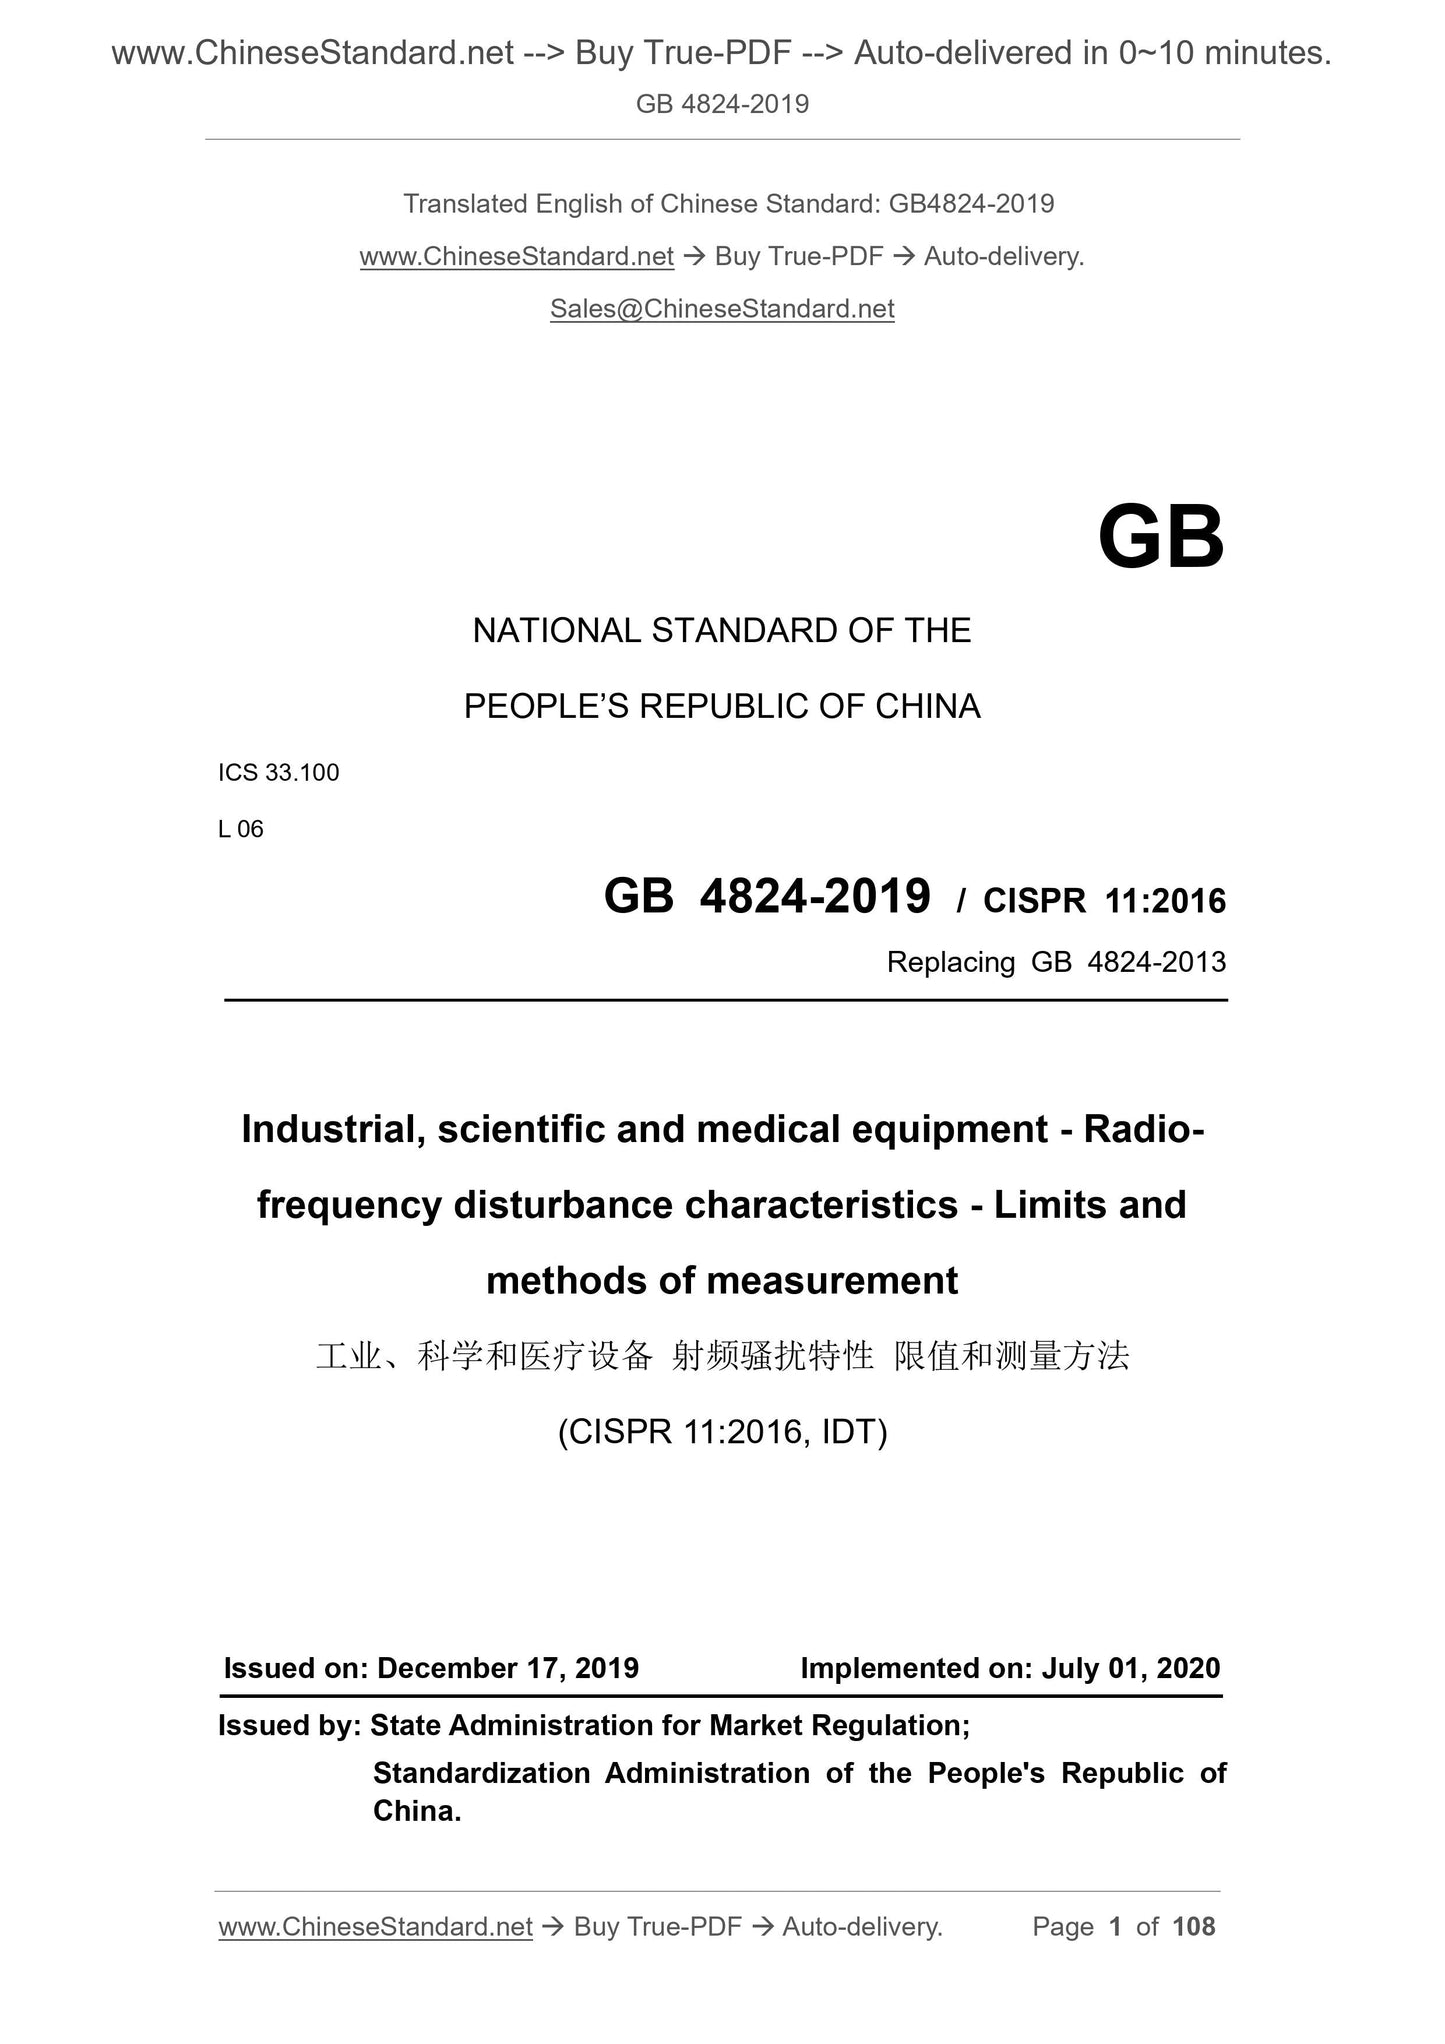 GB 4824-2019 Page 1